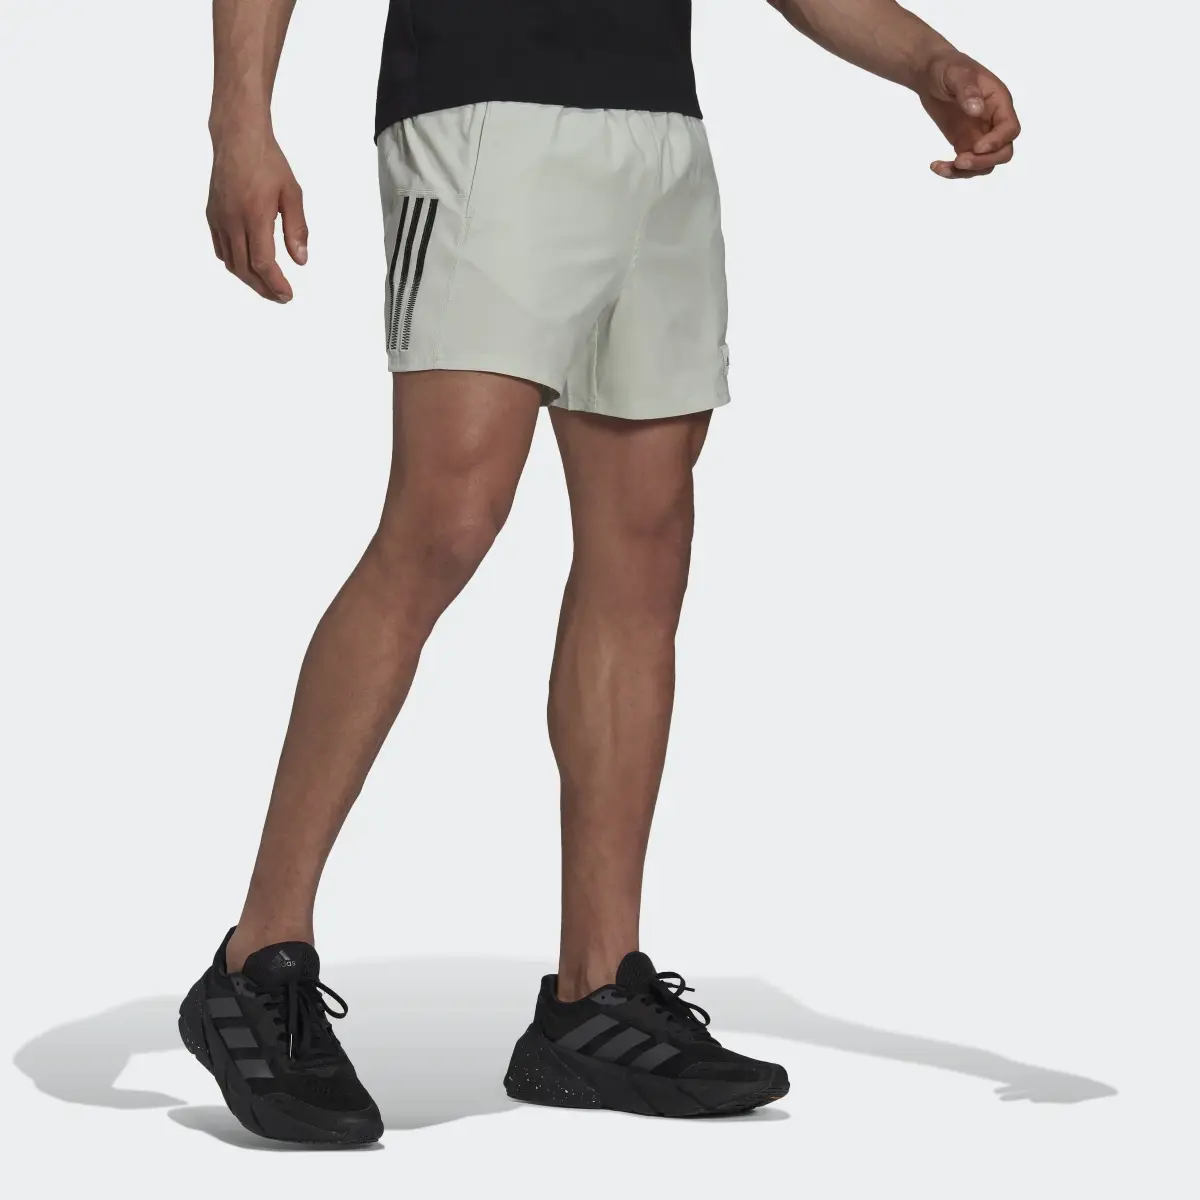 Adidas Shorts Parley Run for the Oceans. 3